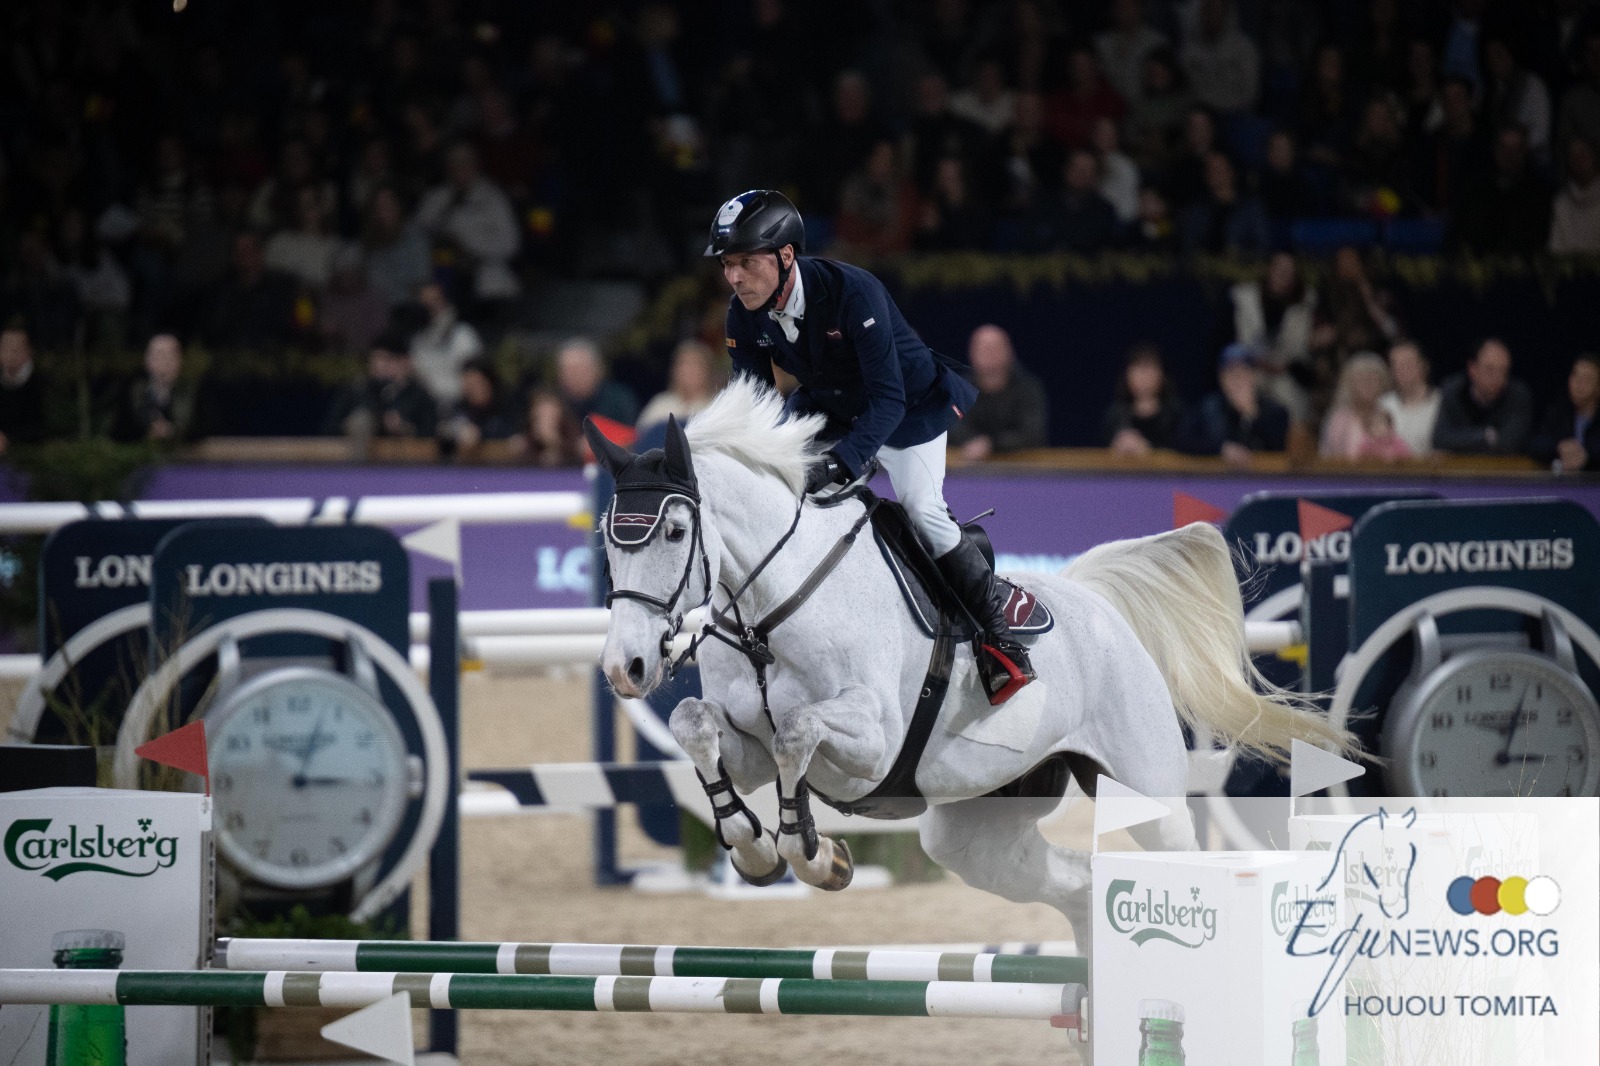 Hans-Dieter Dreher: "This was the first time my horse jumped a 1m60 class"